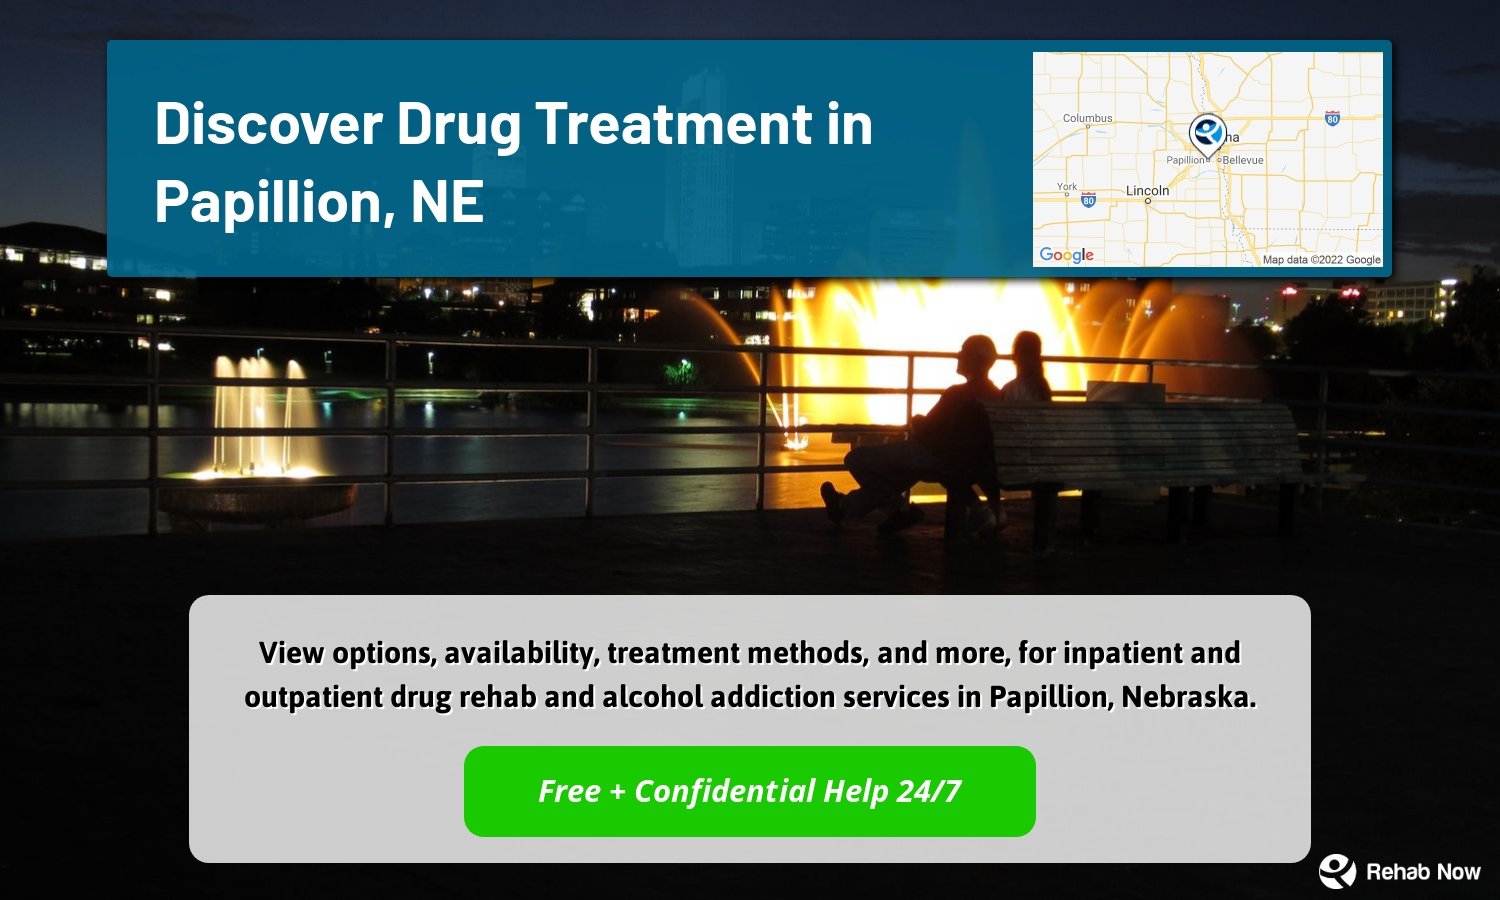 View options, availability, treatment methods, and more, for inpatient and outpatient drug rehab and alcohol addiction services in Papillion, Nebraska.